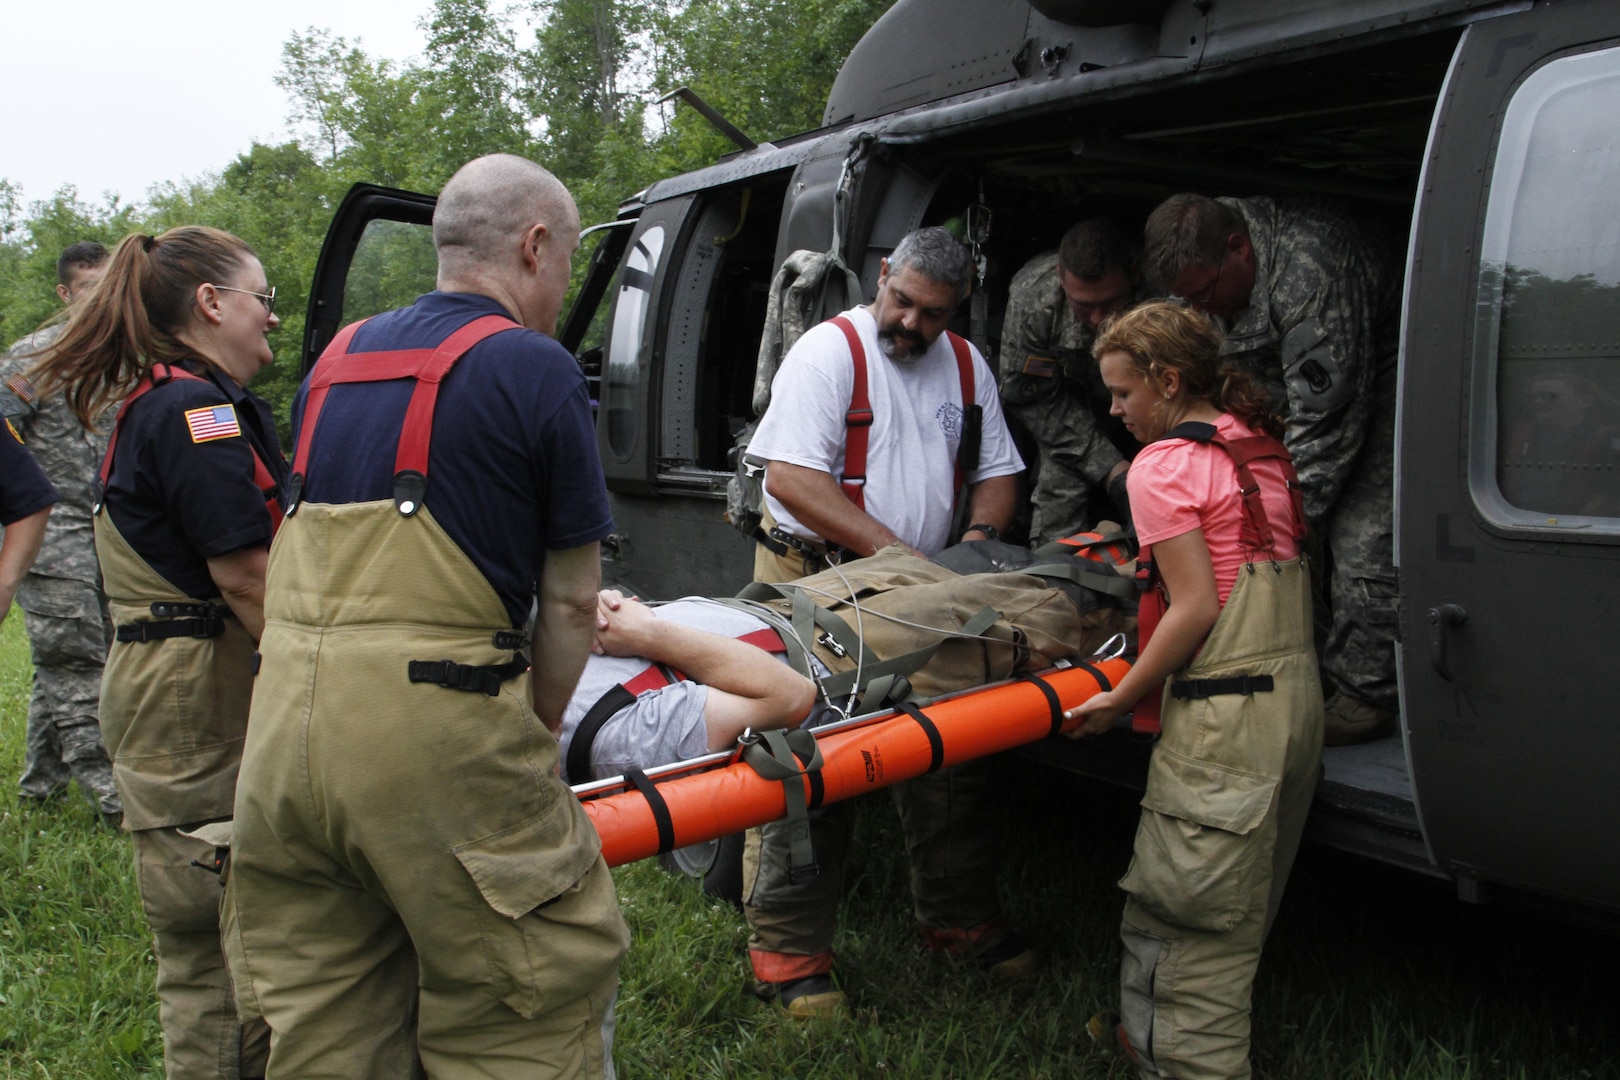 Firefighters with the West Monroe Volunteer Fire Department load a casualty onto a UH-60 Black Hawk helicopter with the help of Sgt. Michael Butler, a flight medic, and Spc. Brian Watson, a crew chief, both with Company F, 1st Battalion, 169th General Support Aviation Battalion, during a cold load training exercise in Cicero, N.Y., Saturday, July 18, 2015. (U.S. Army National Guard  photo by Sgt. Jonathan Monfiletto/Released)